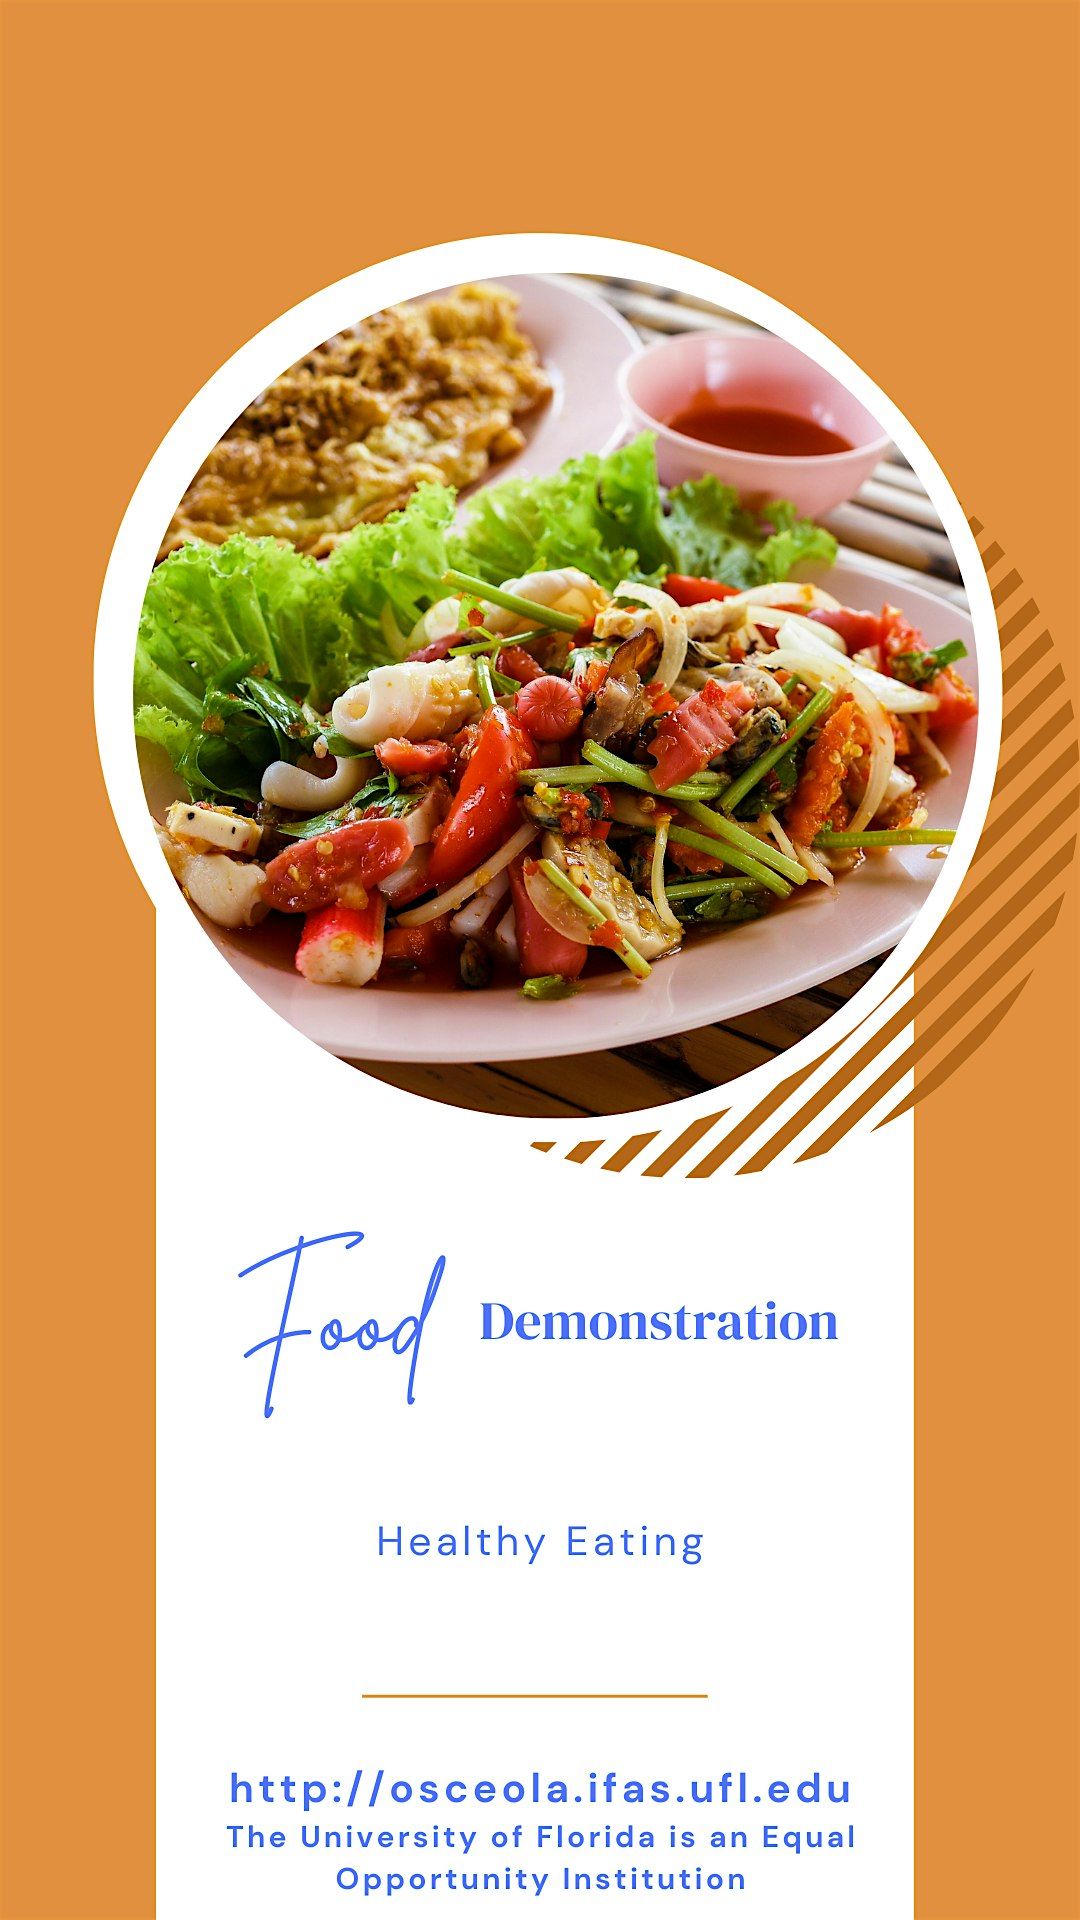 "Healthy Eating" Food Demonstration - Tuesday, July 30th, 11:00 am